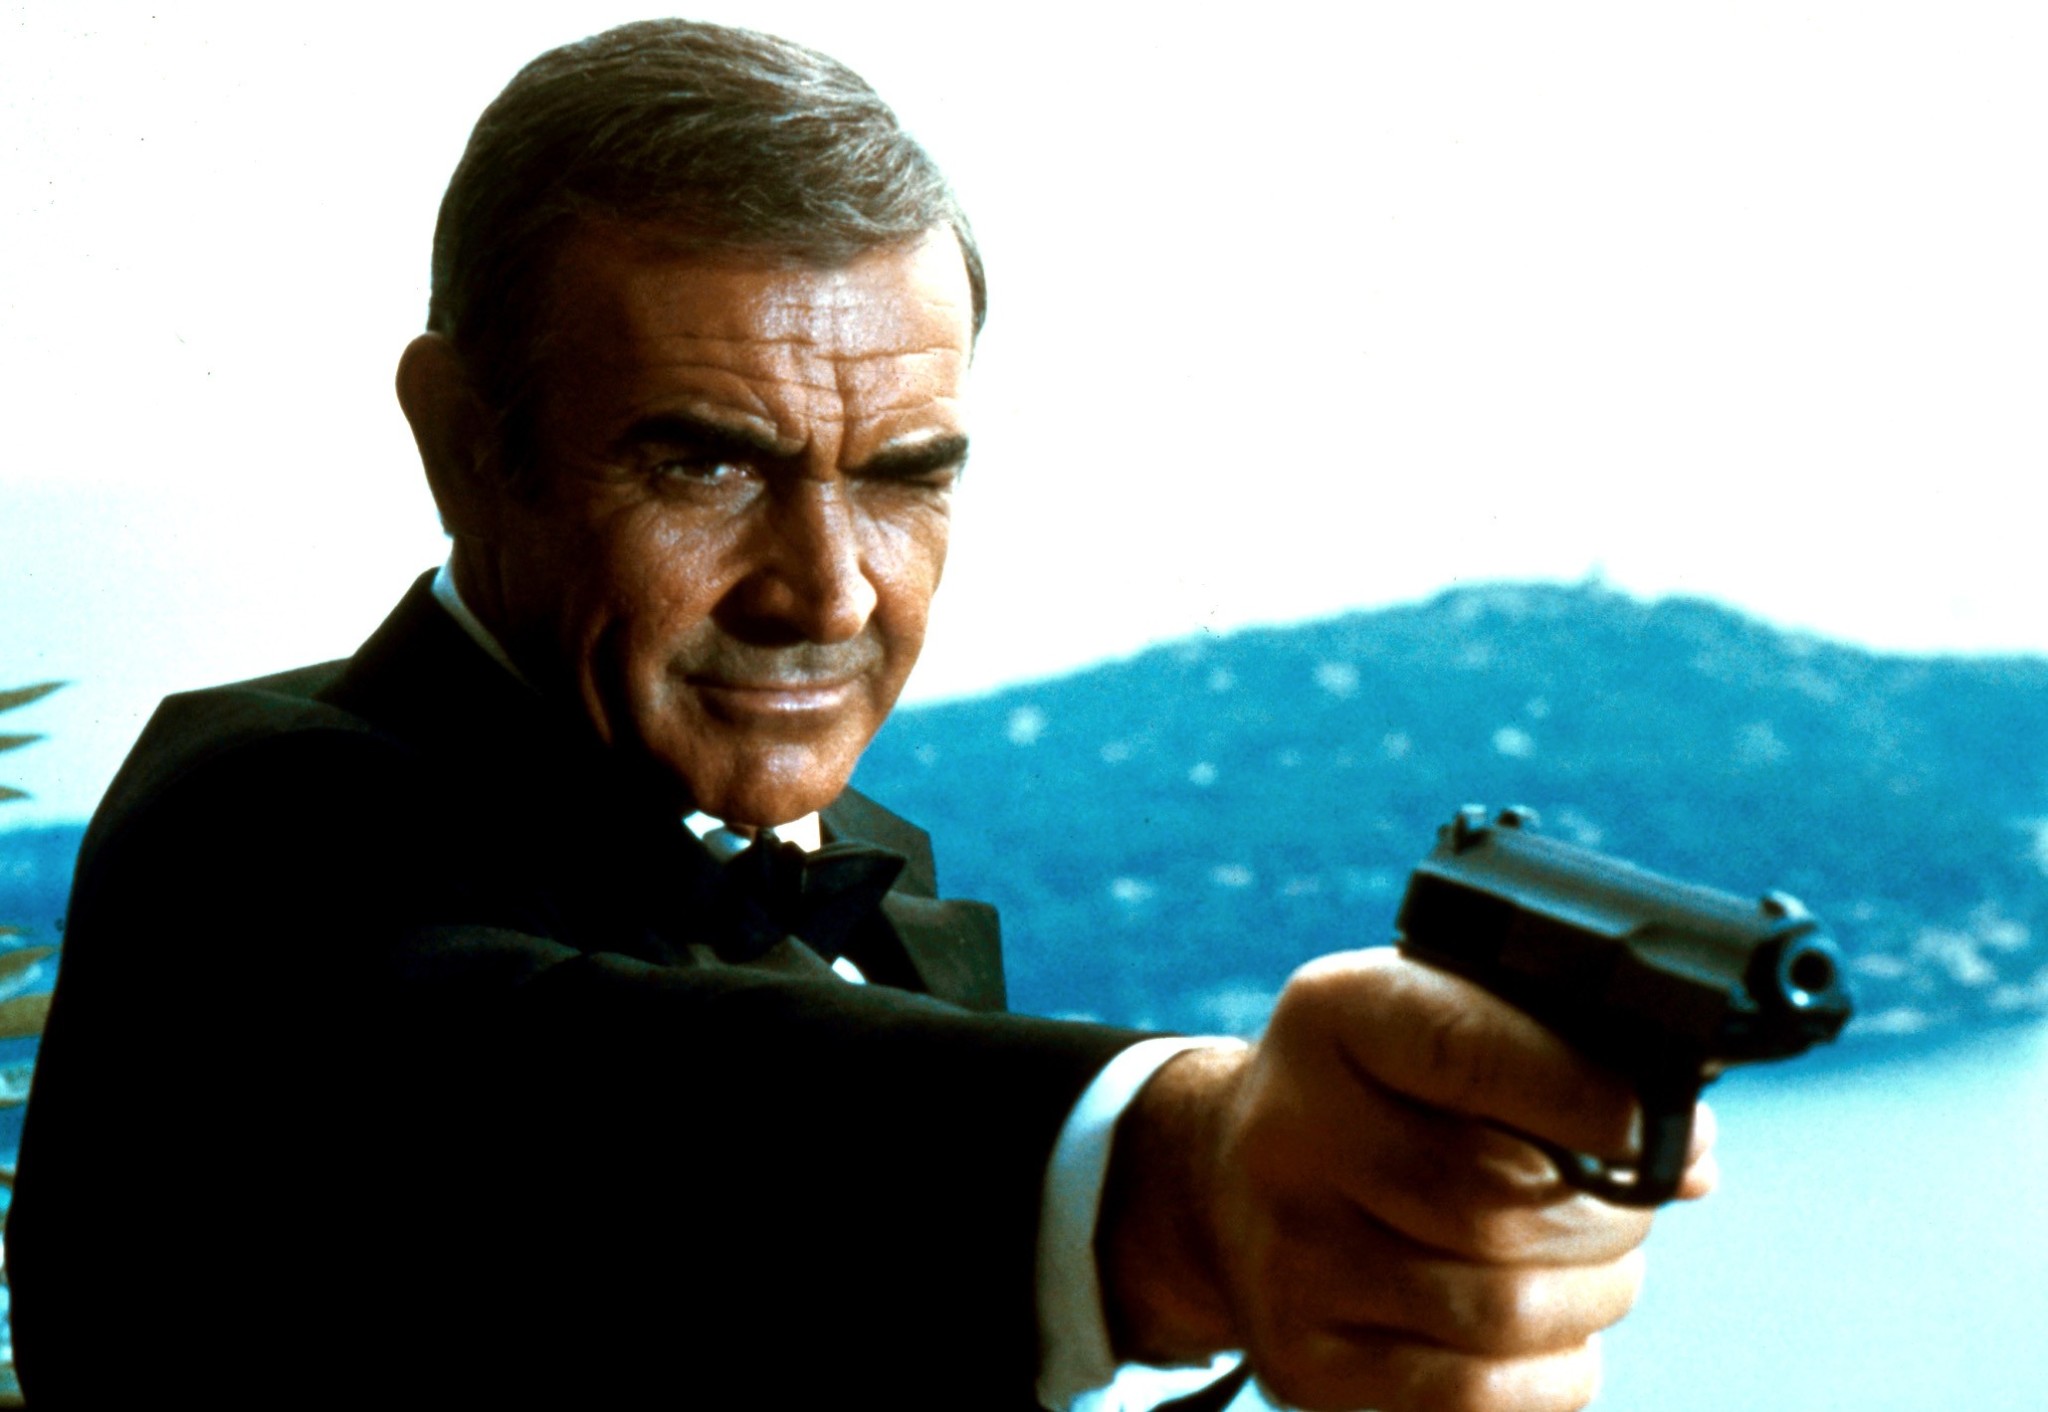 Sean Connery as James Bond in Never Say Never Again, 1983